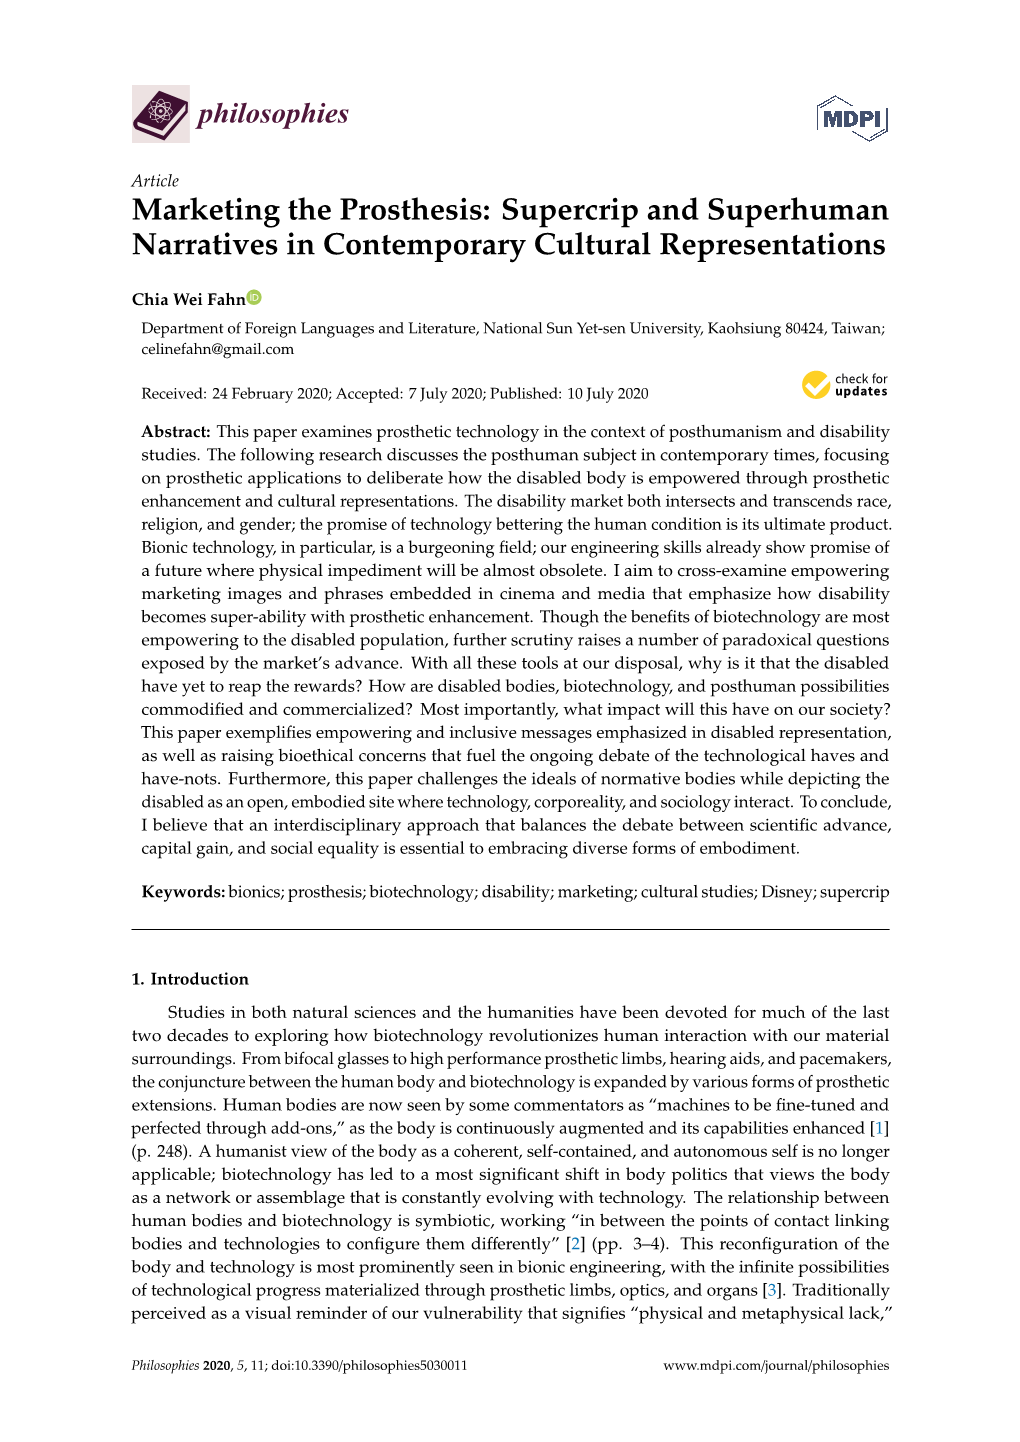 Marketing the Prosthesis: Supercrip and Superhuman Narratives in Contemporary Cultural Representations